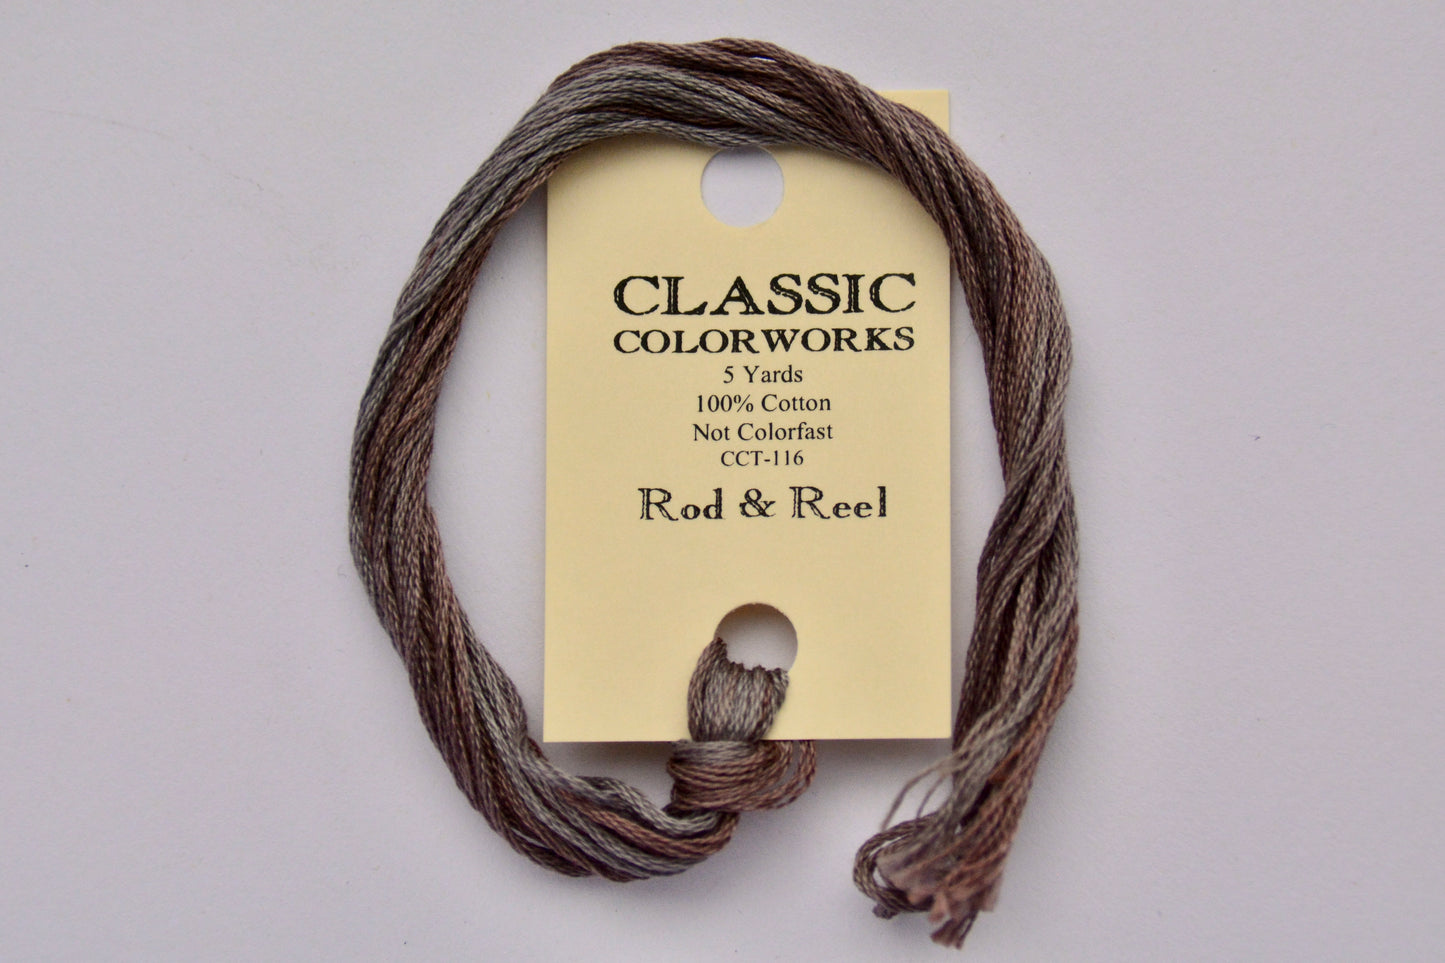 Rod & Reel Classic Colorworks 6-Strand Hand-Dyed Embroidery Floss